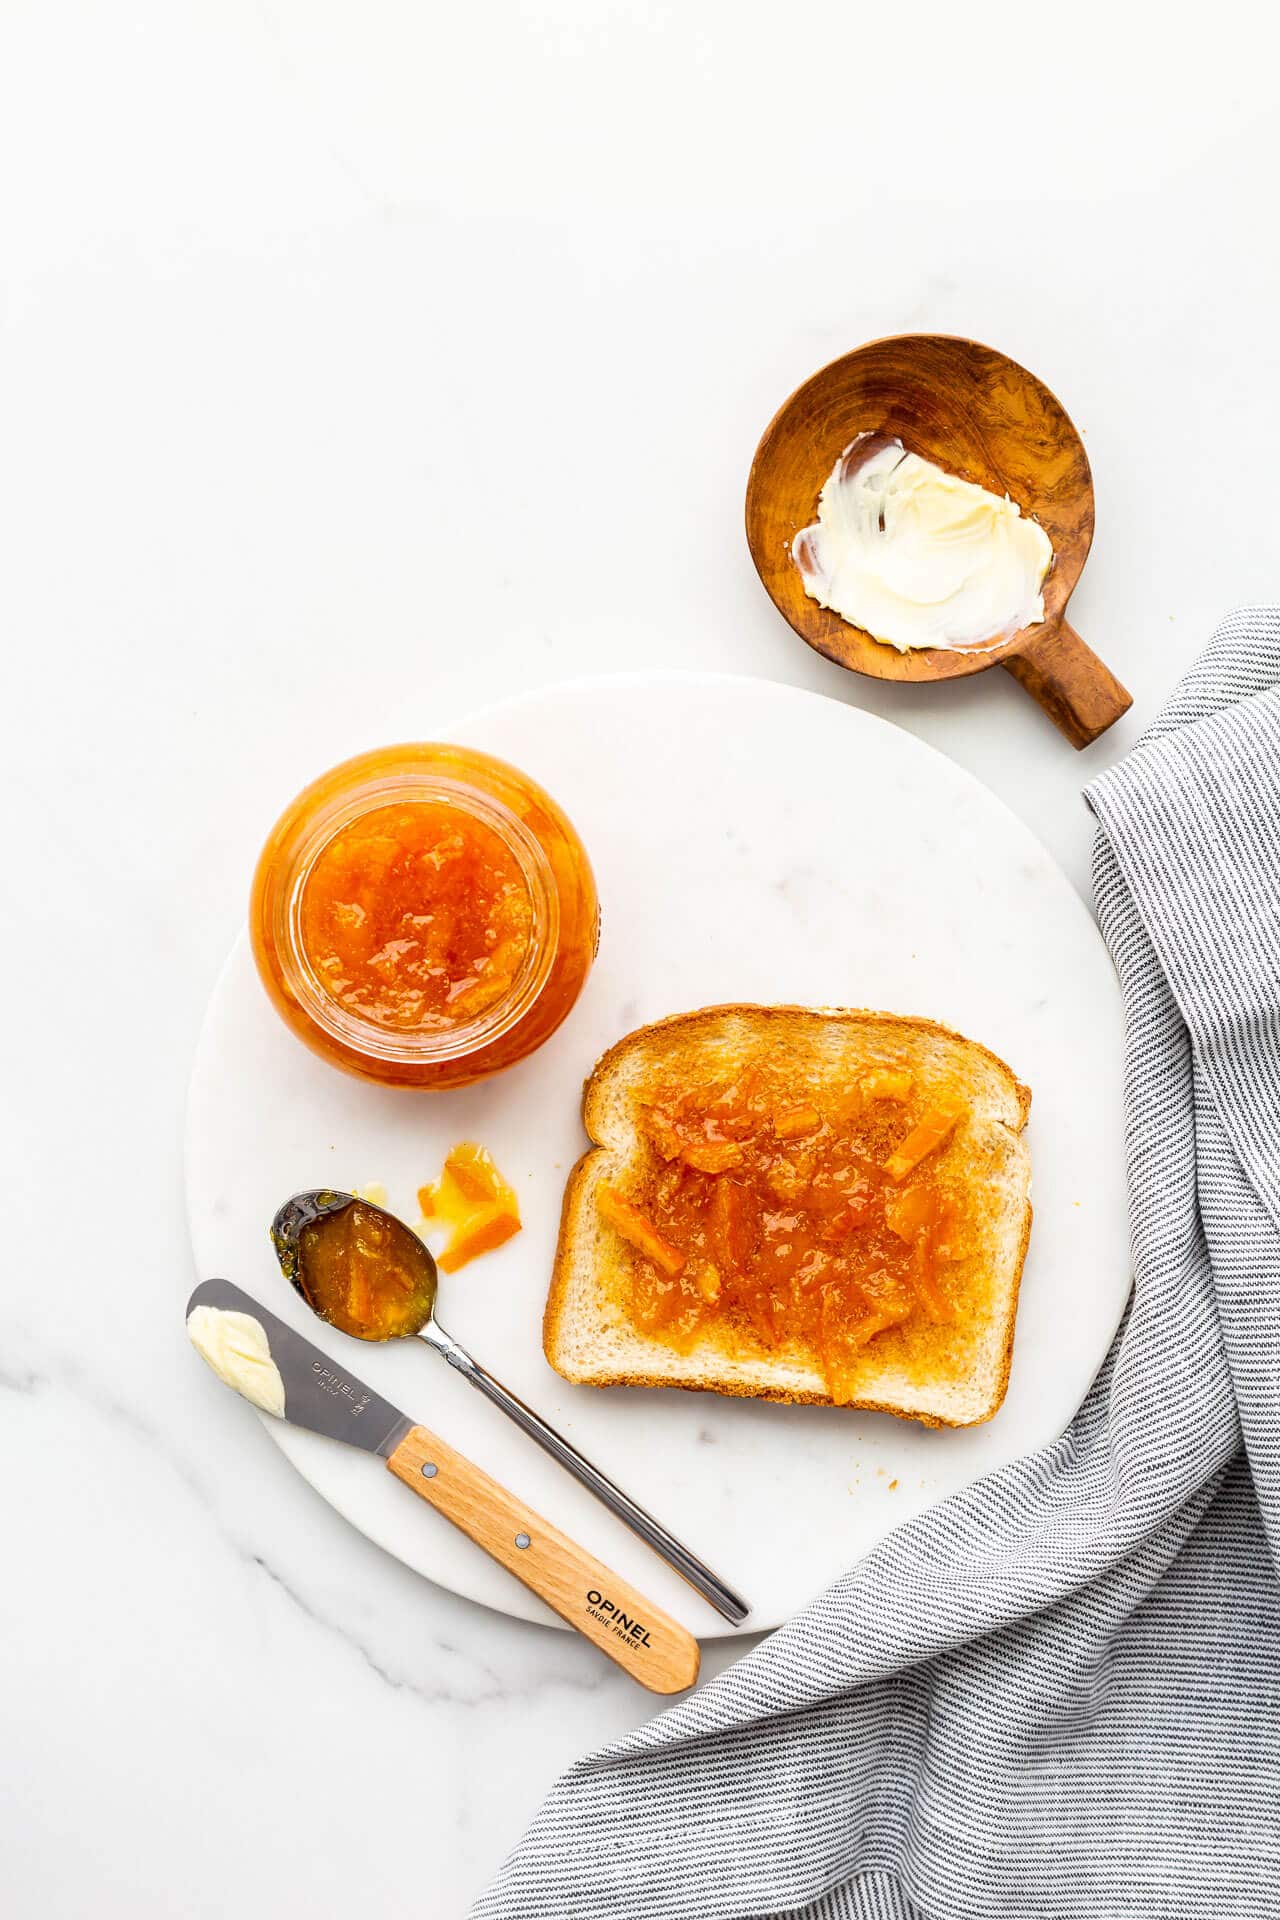 Slice of toast, buttered, and topped with orange marmalade.